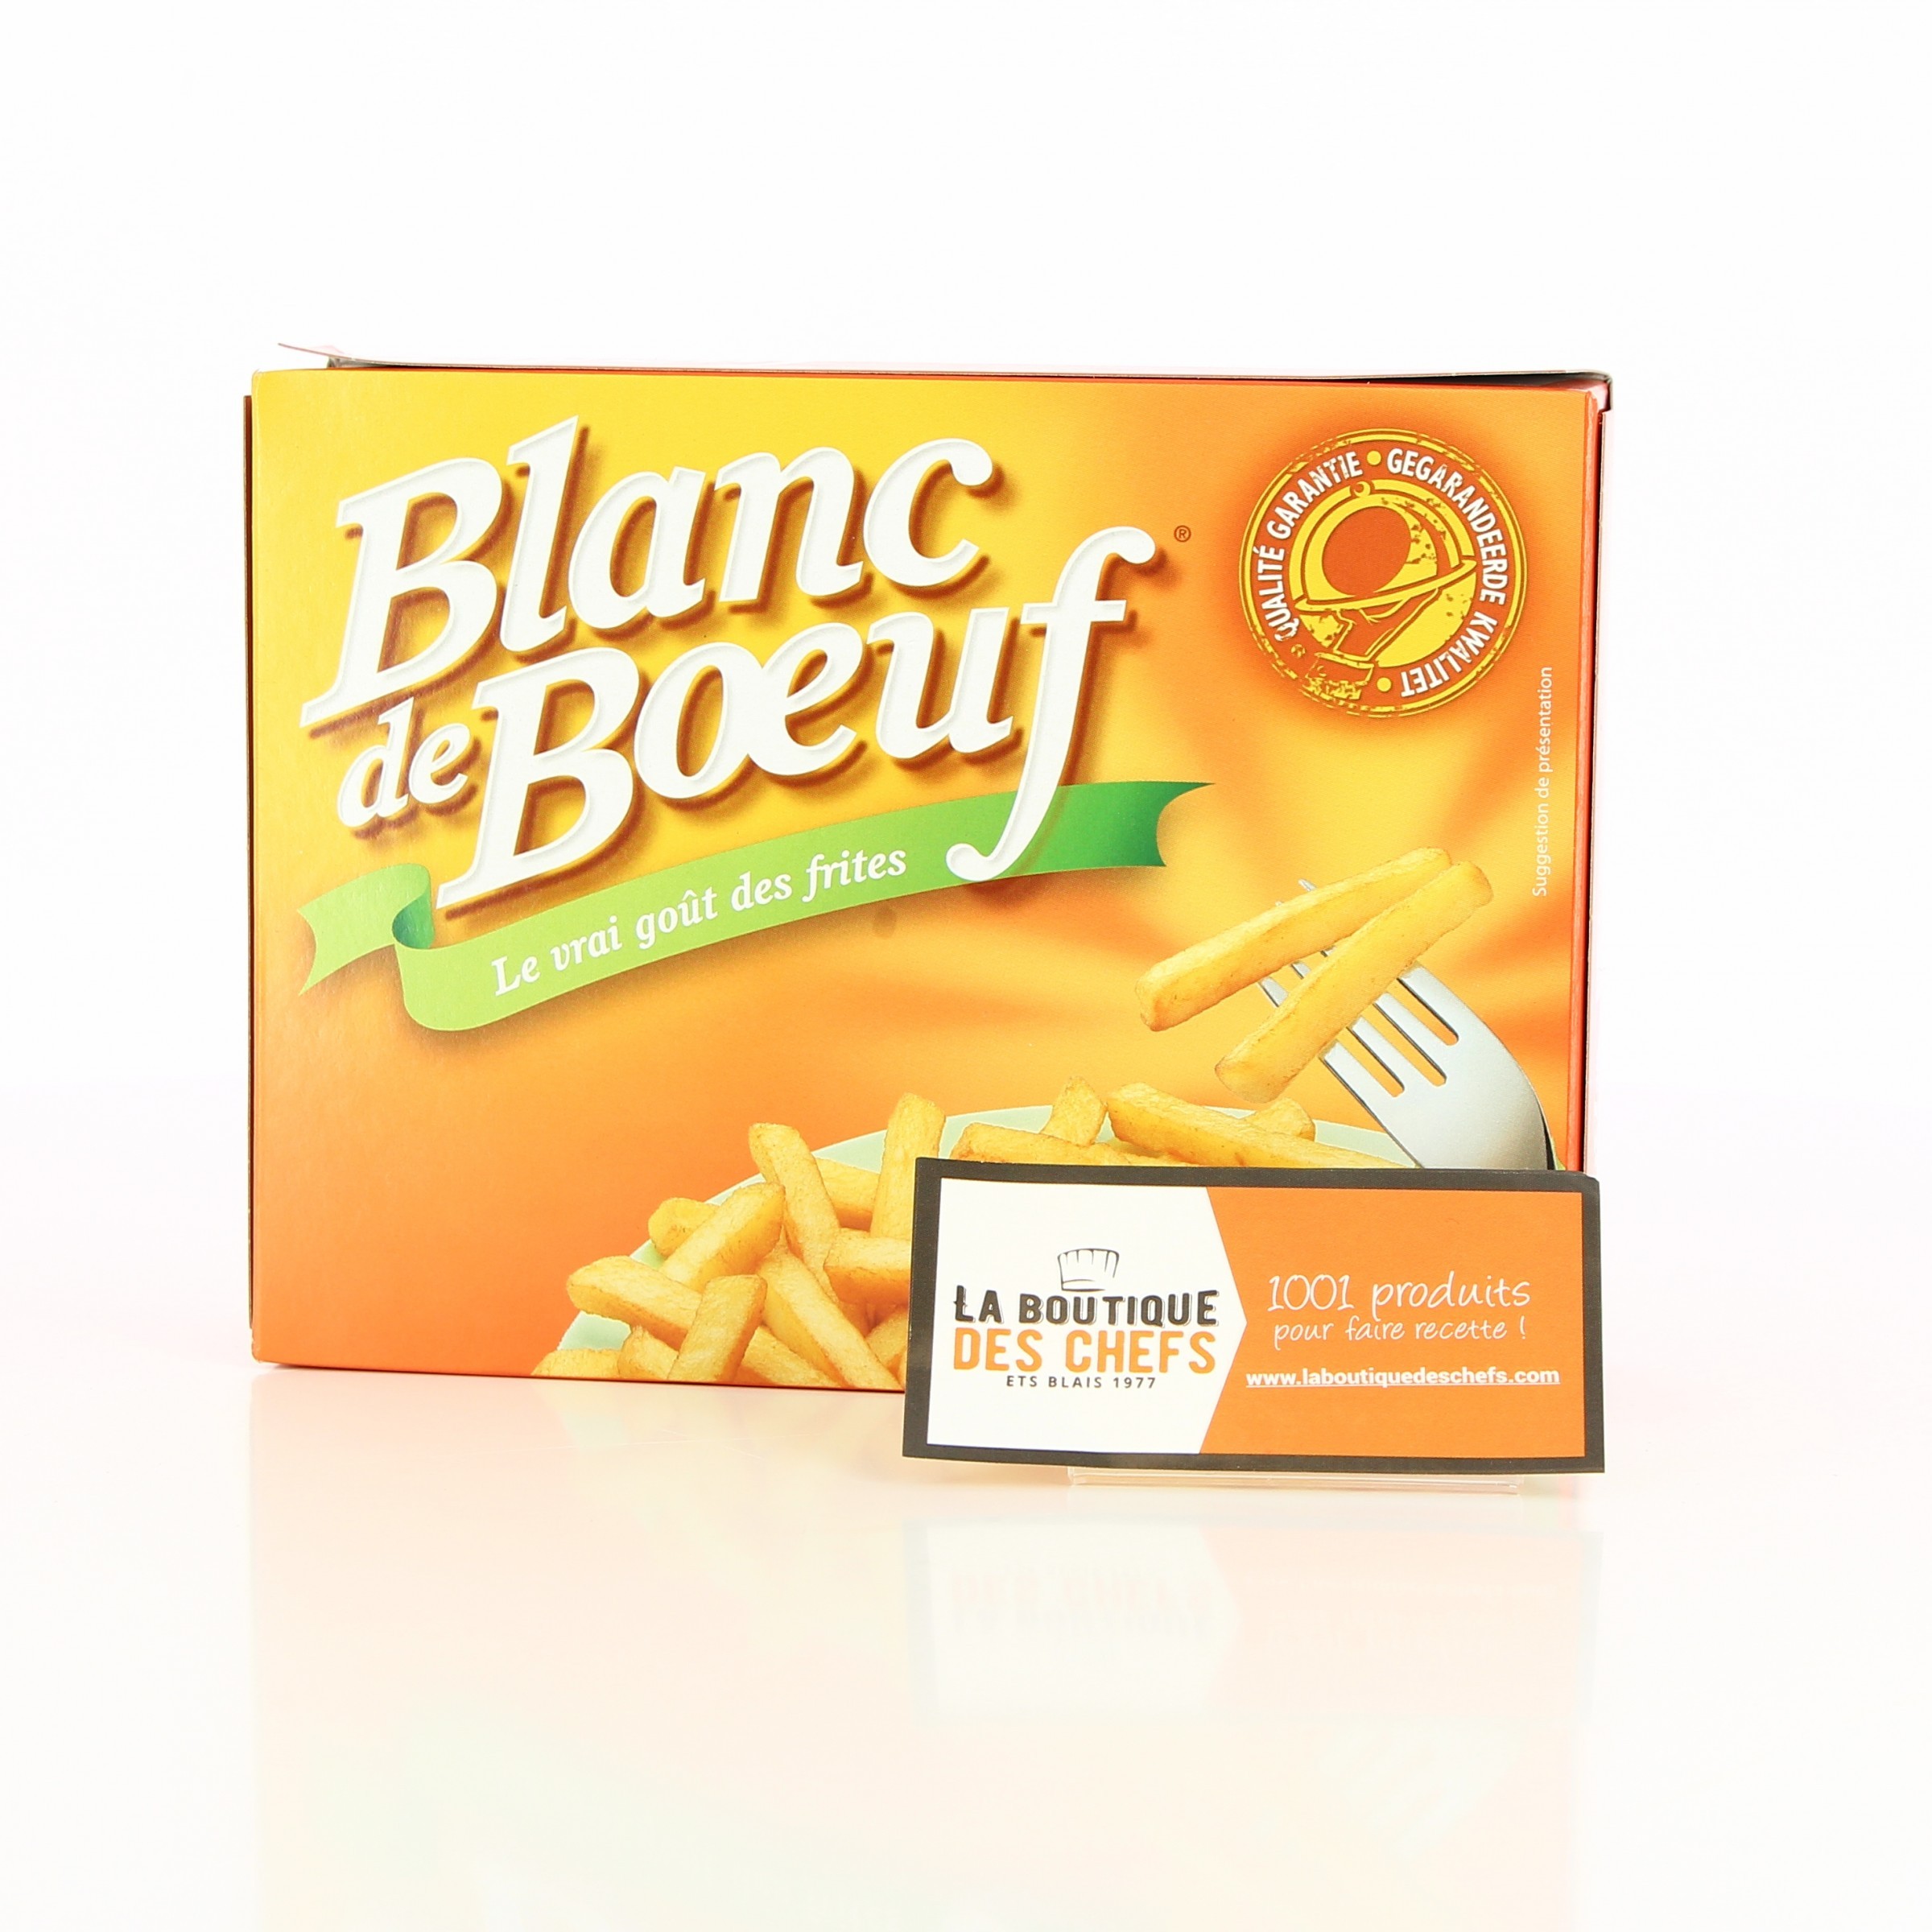 Gros Sel Alimentaire Blanc 25 kg - Sels - La Toque d'Or